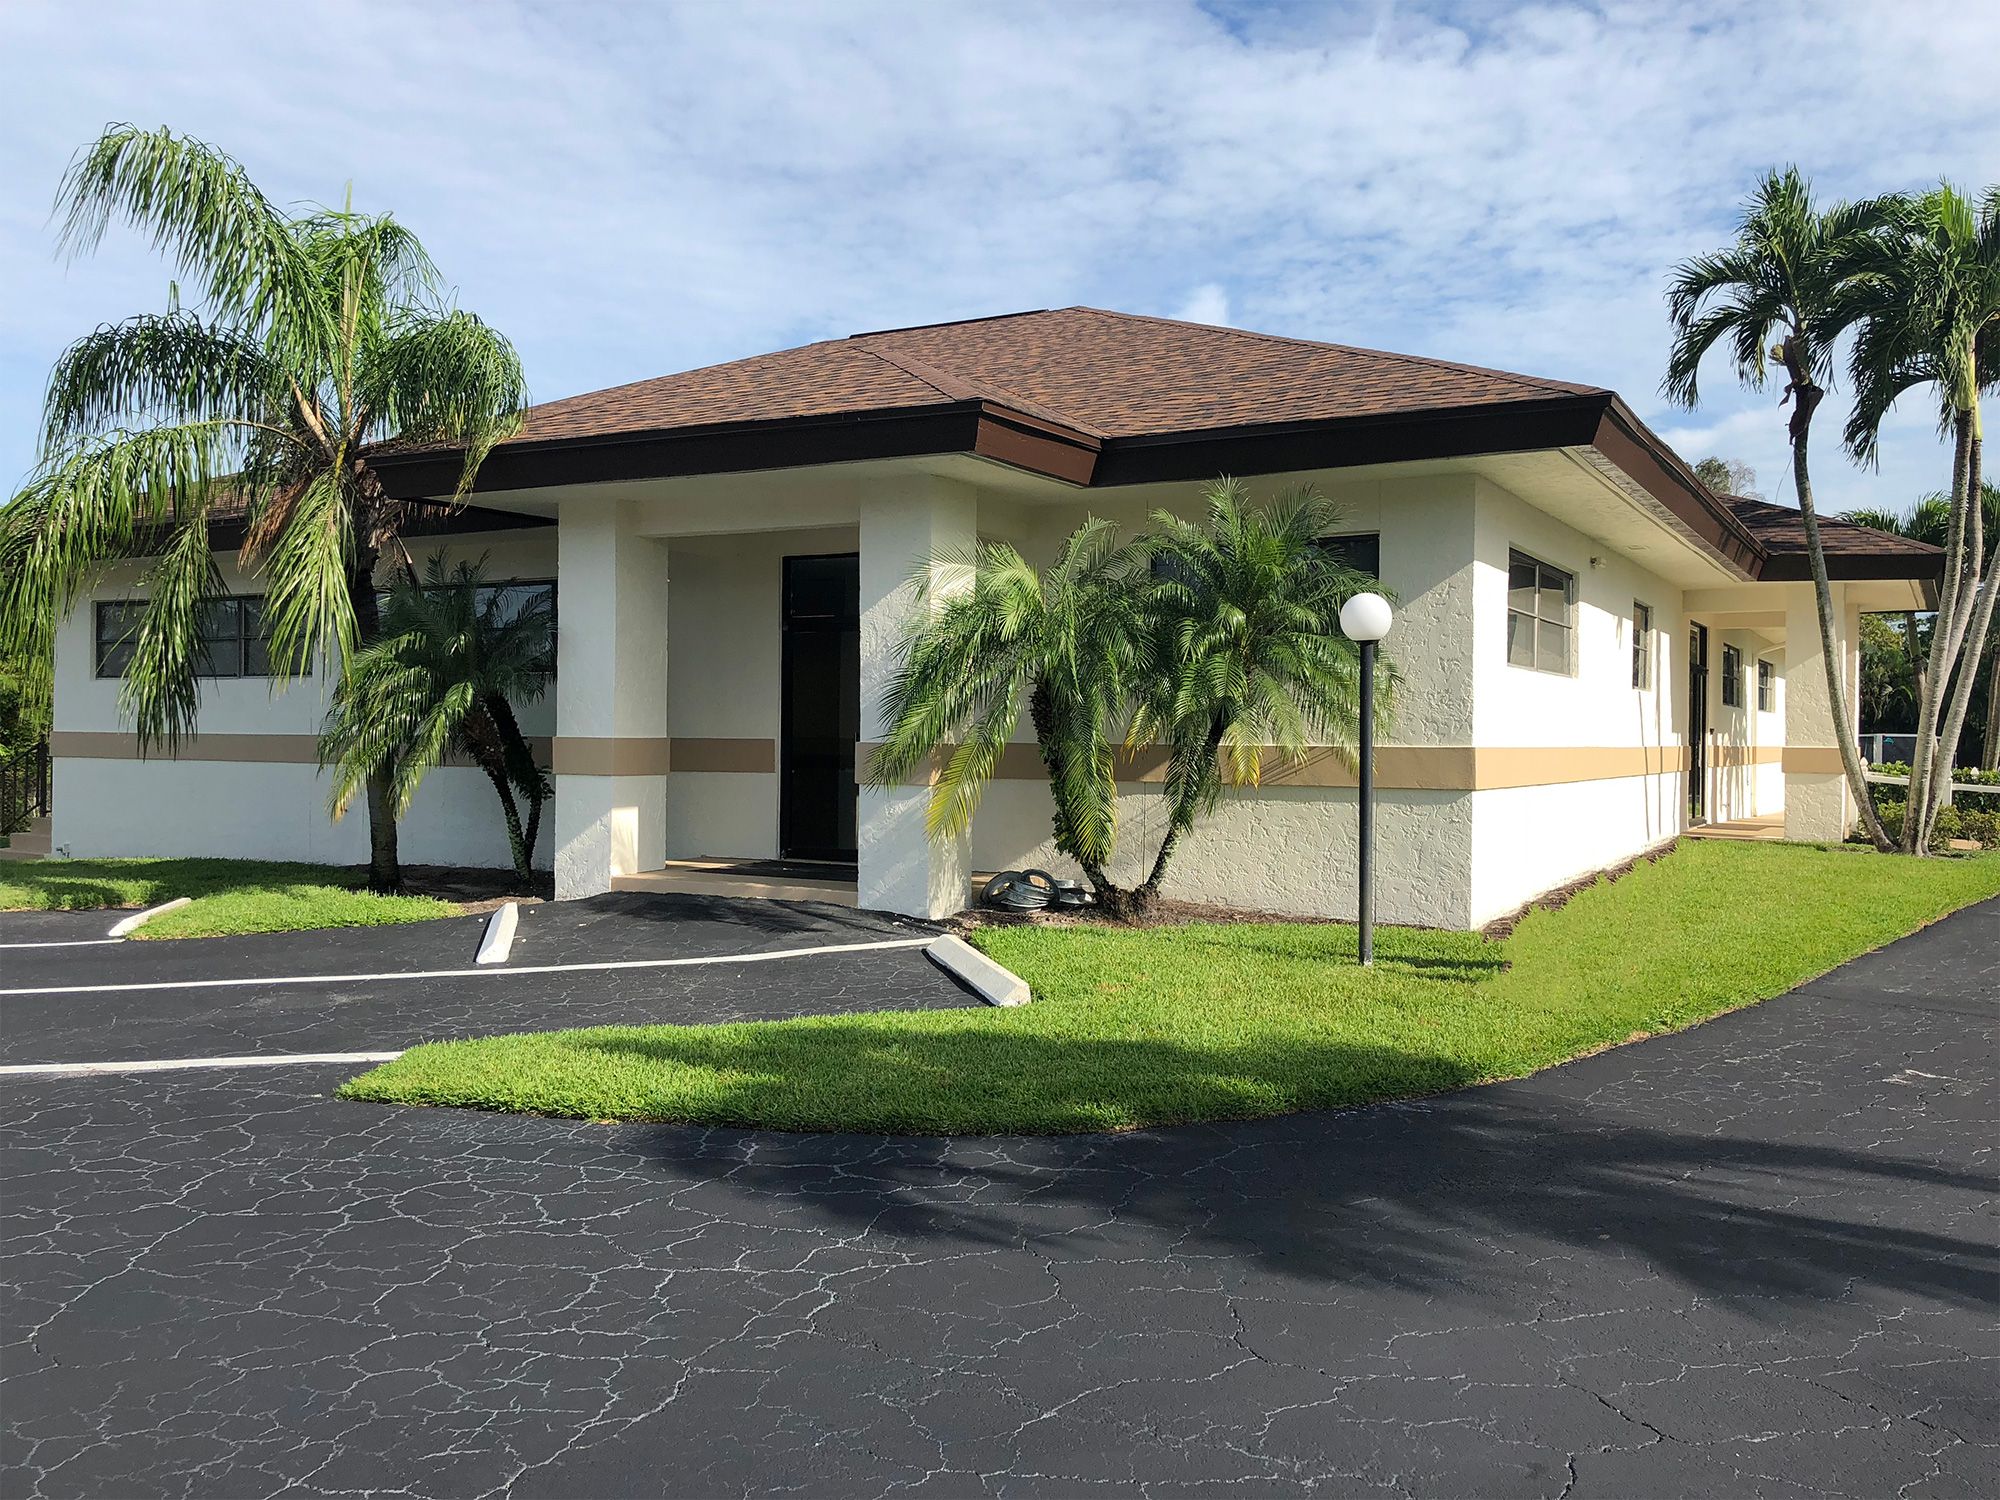 Commercial Neighborhood Painting in Naples, Florida